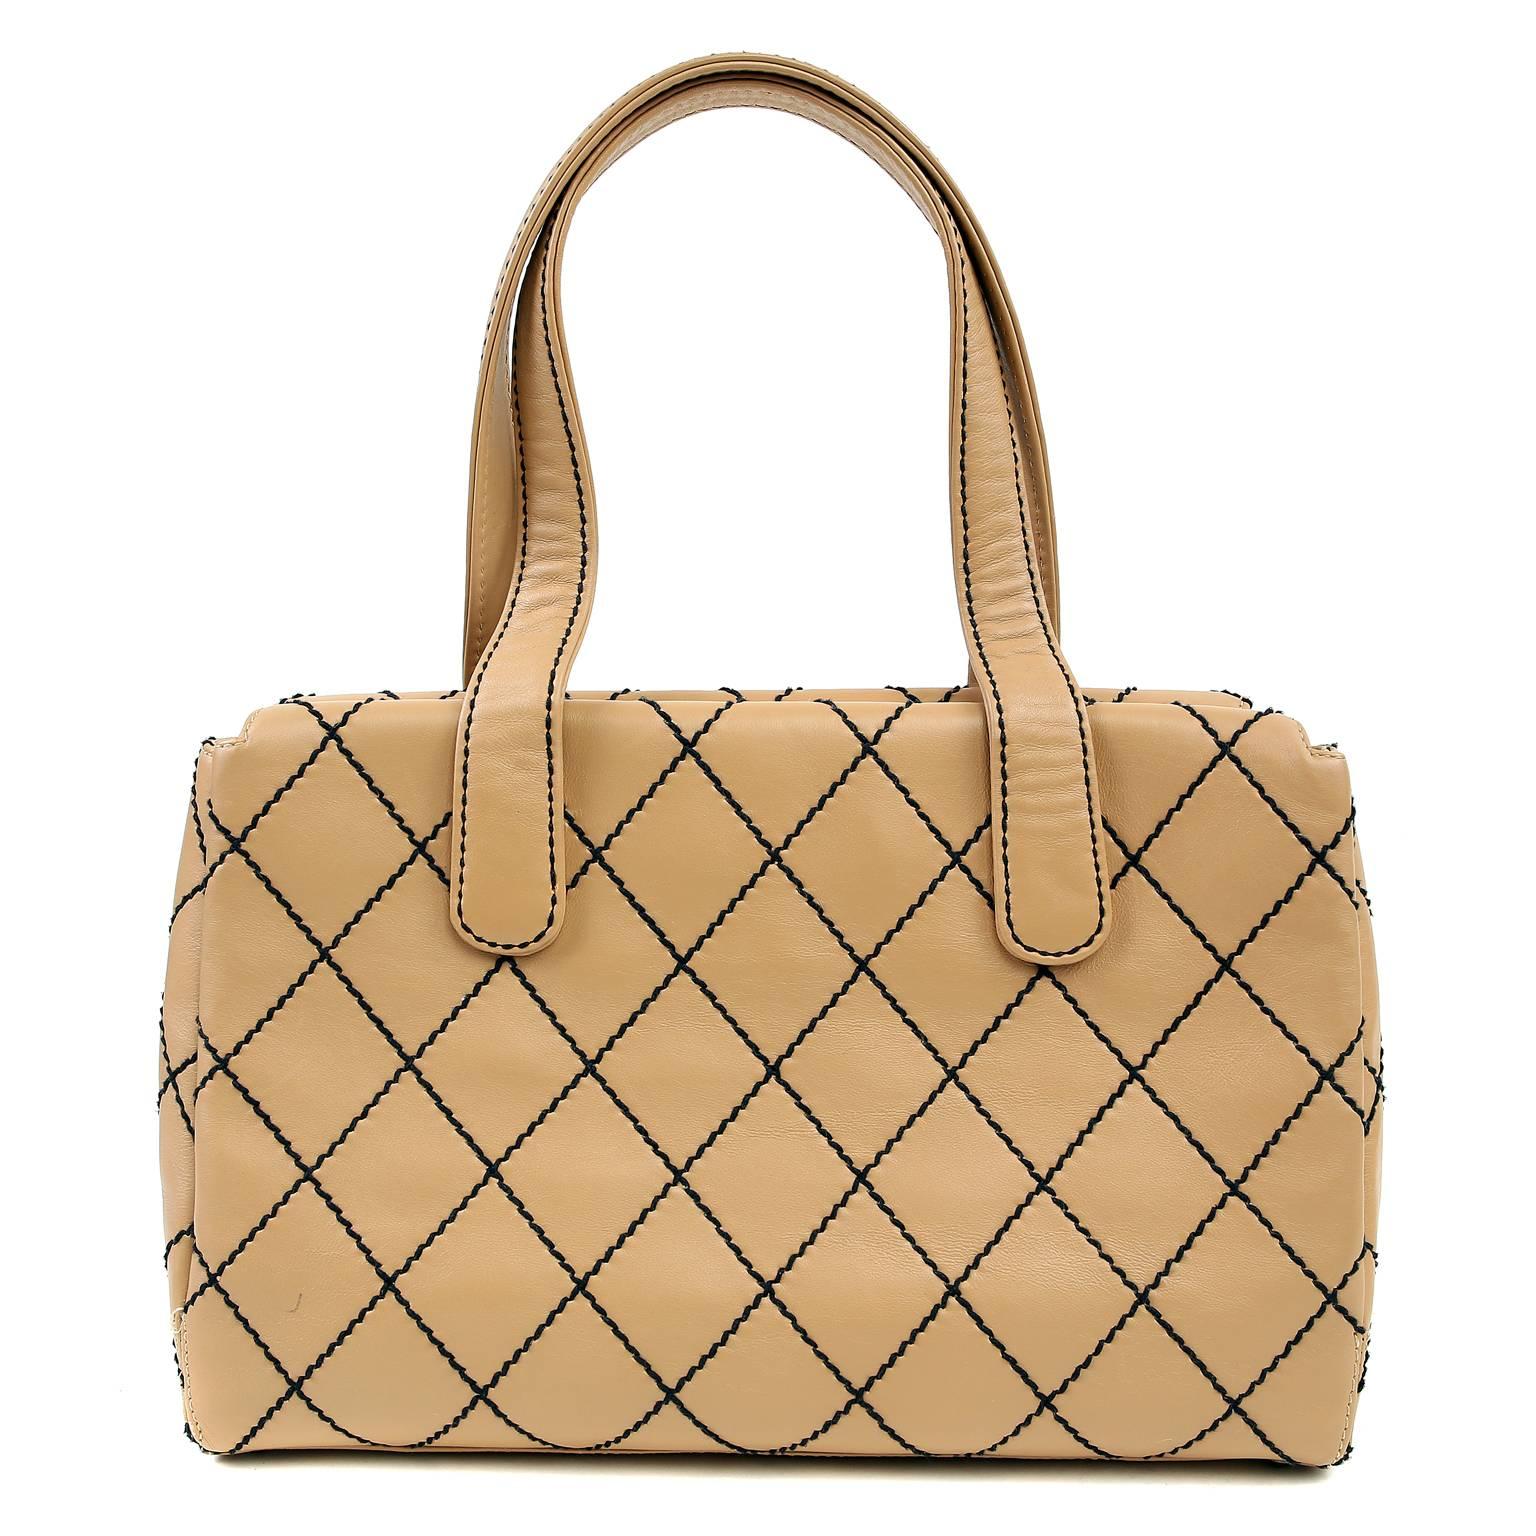 Brown Chanel Beige Leather Tote with Black Top Stitching For Sale